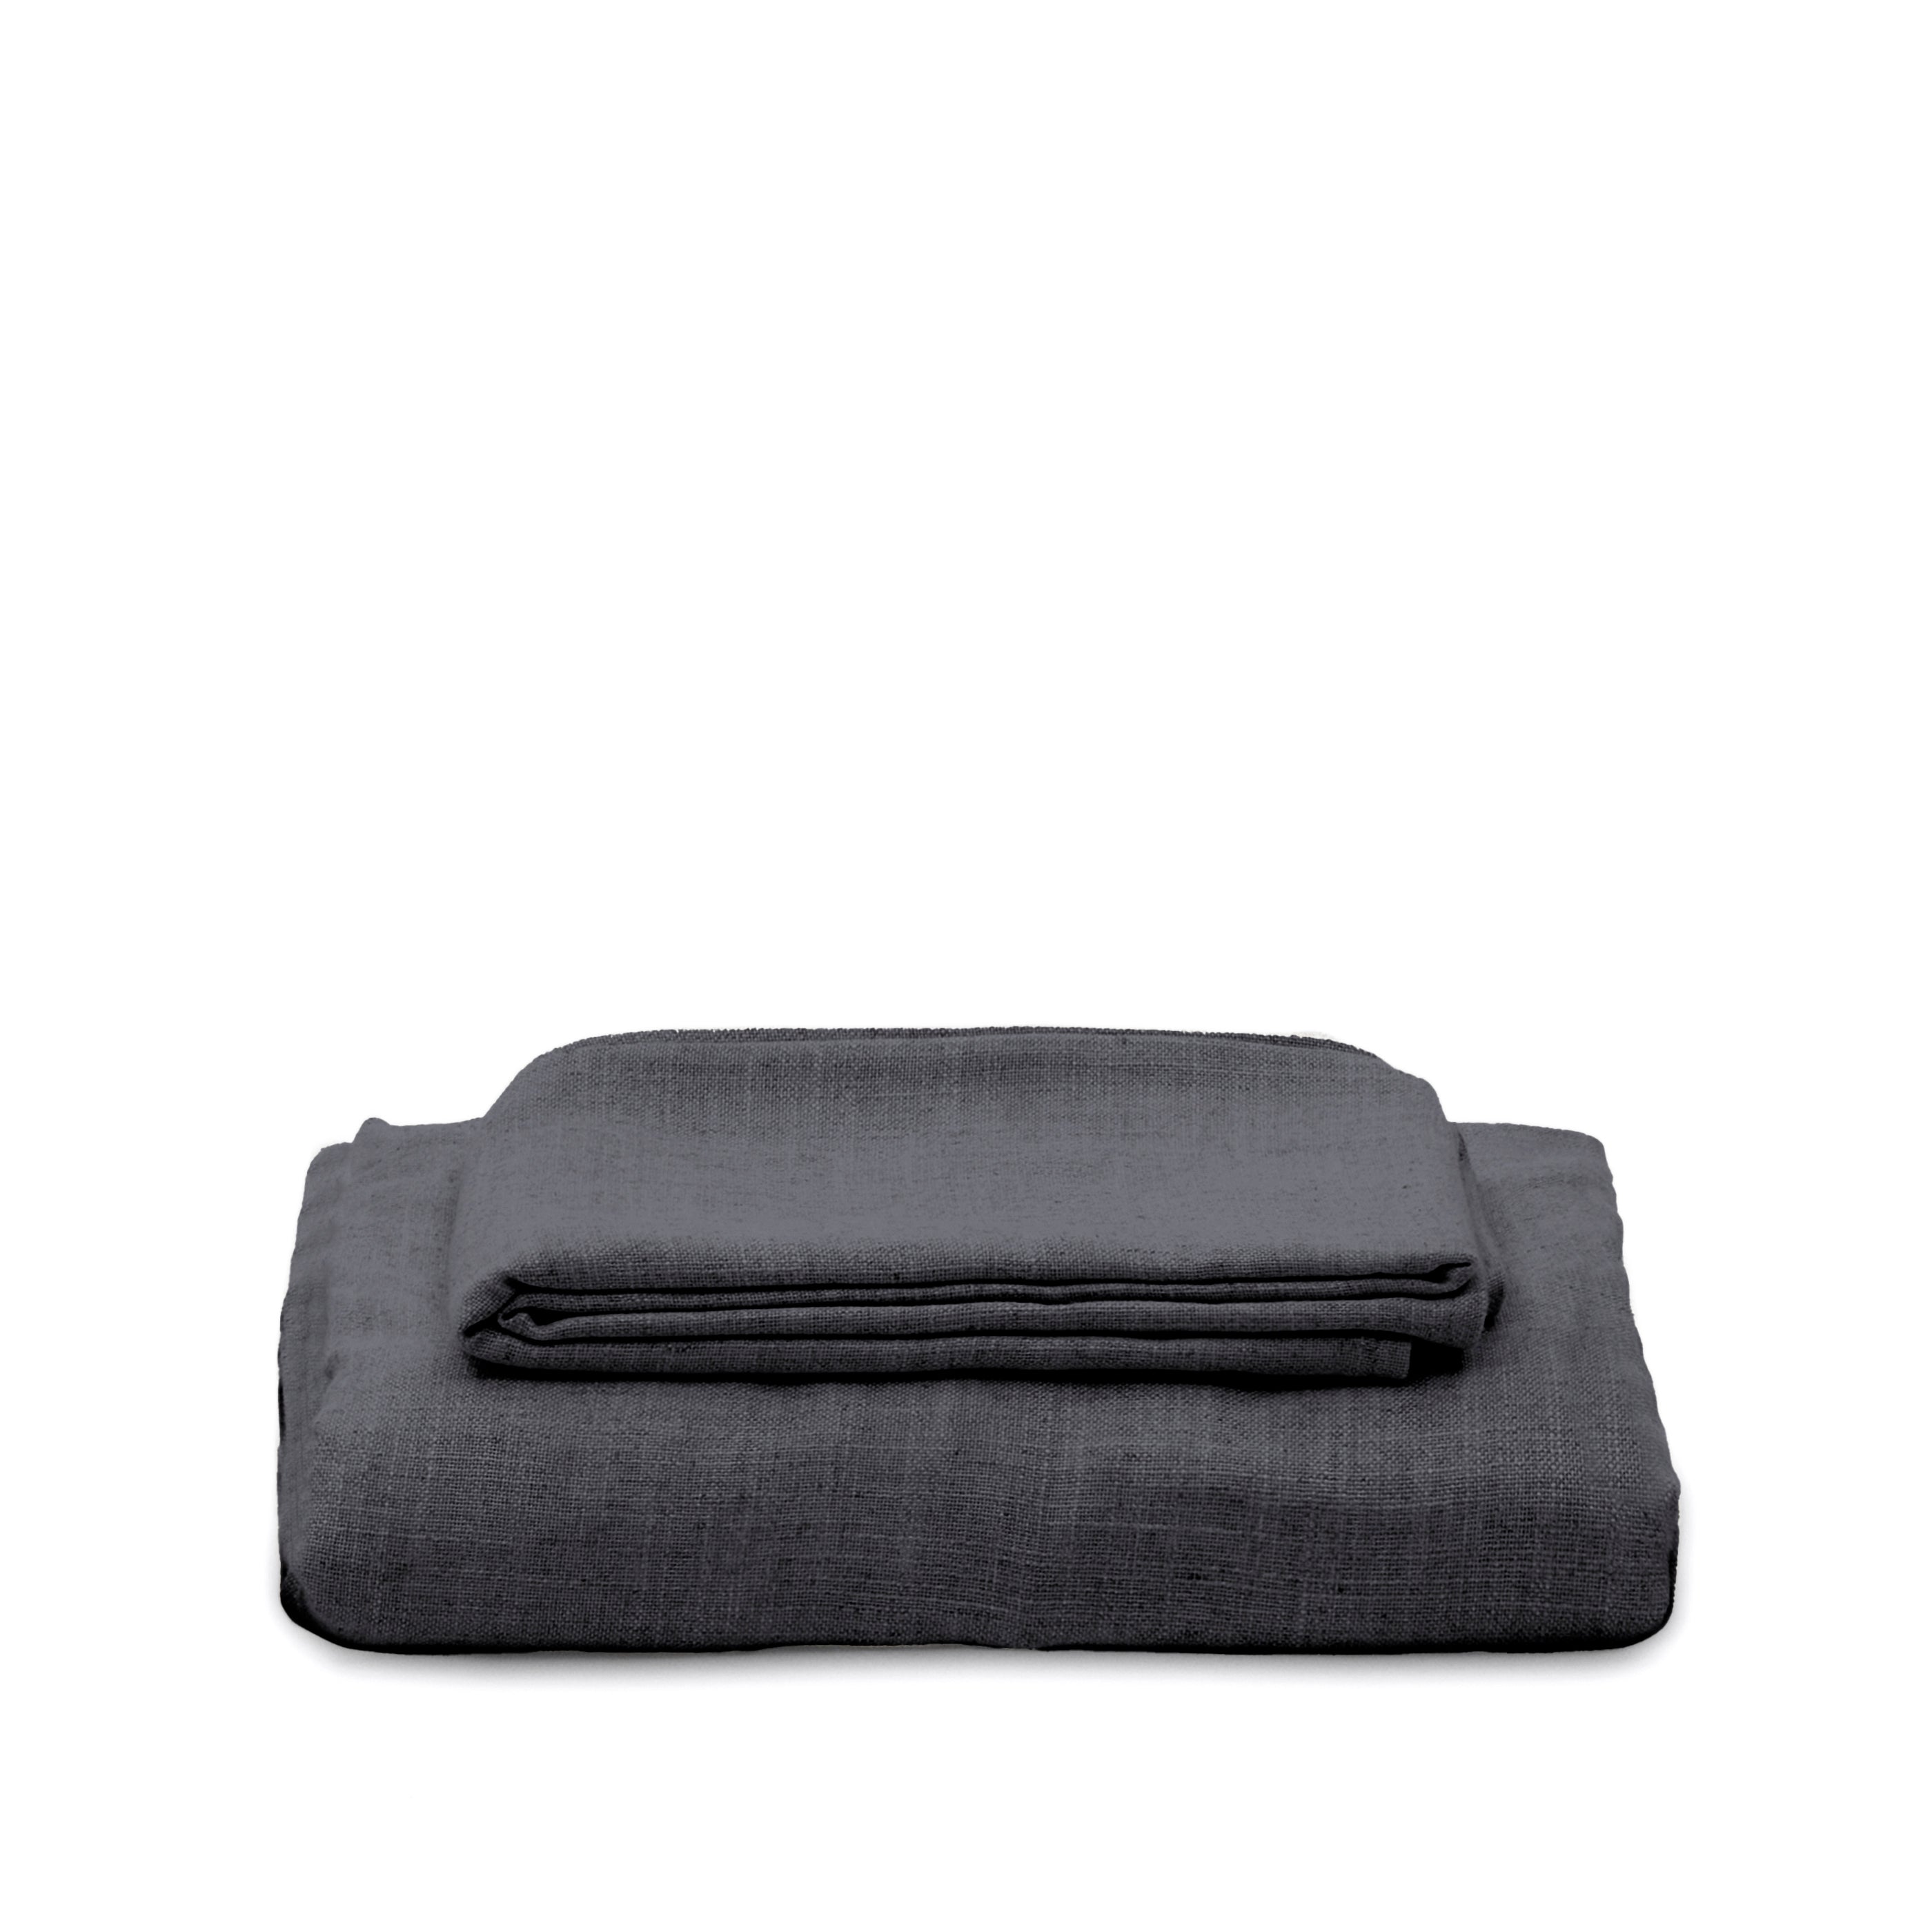 Nora 4-seat sofa cover in anthracite gray linen and cotton